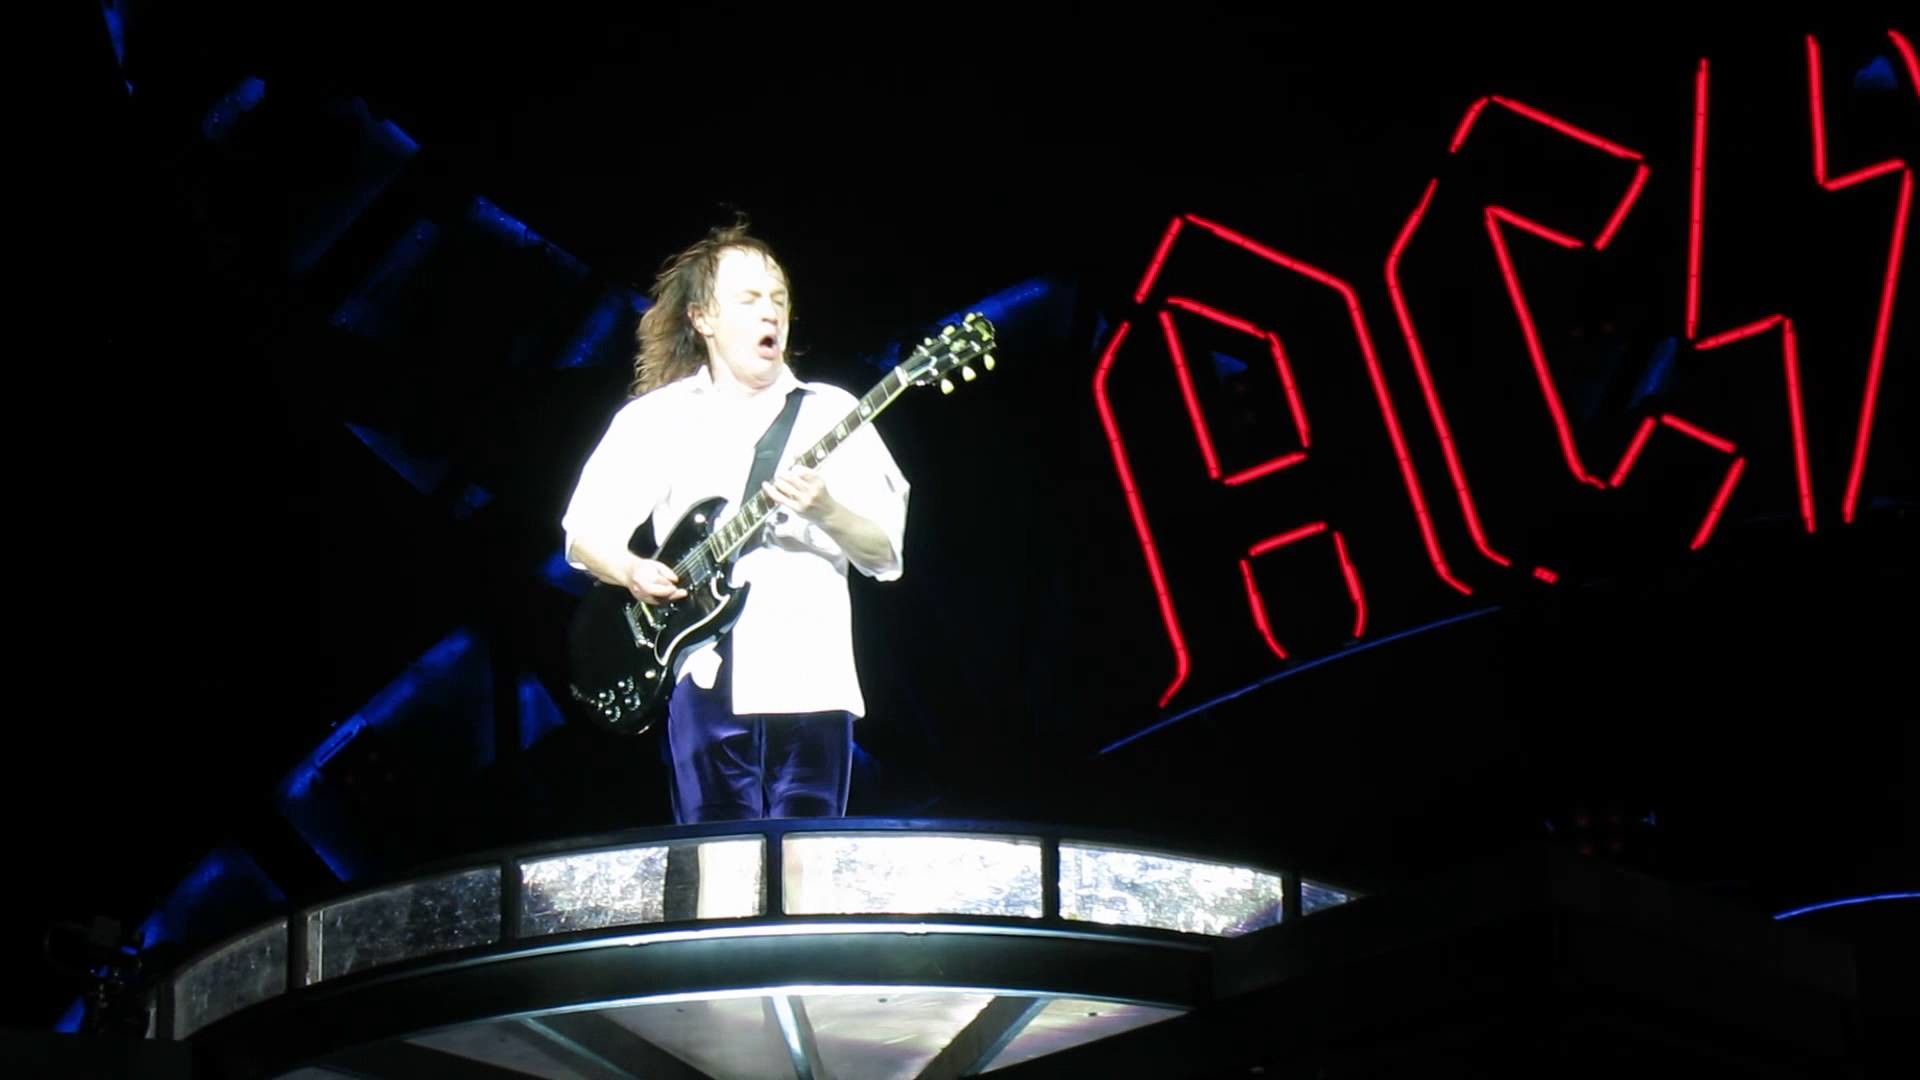 1920x1080 AC/DC - Let There Be Rock ** Angus Young nearby ** San Francisco, CA -  09/25/2015